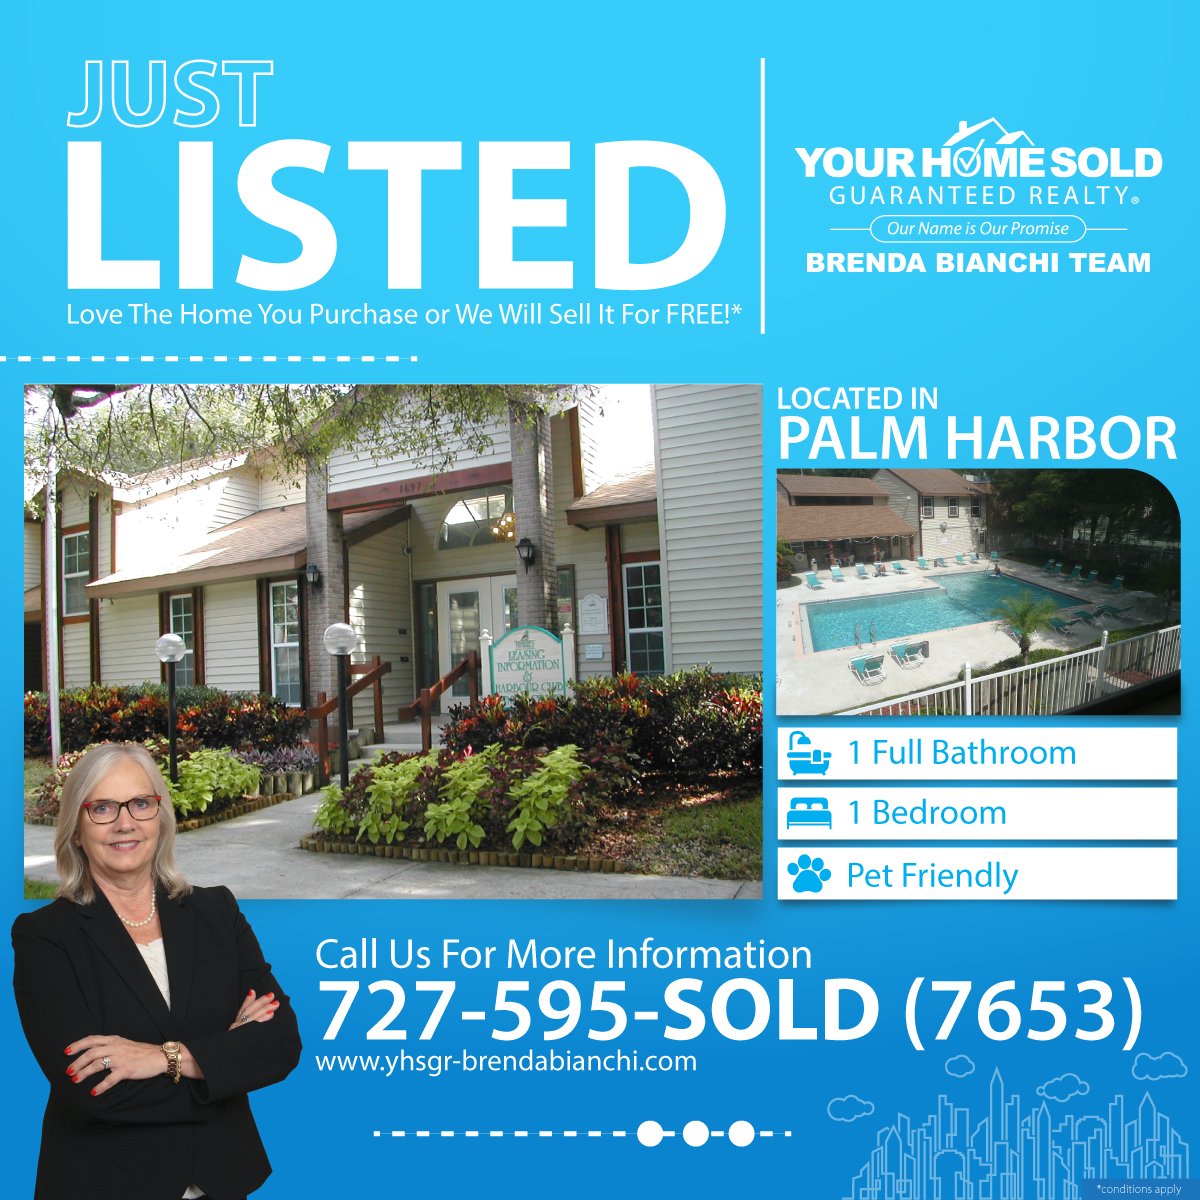 JUST-LISTED_PALM-HARBOR.jpg